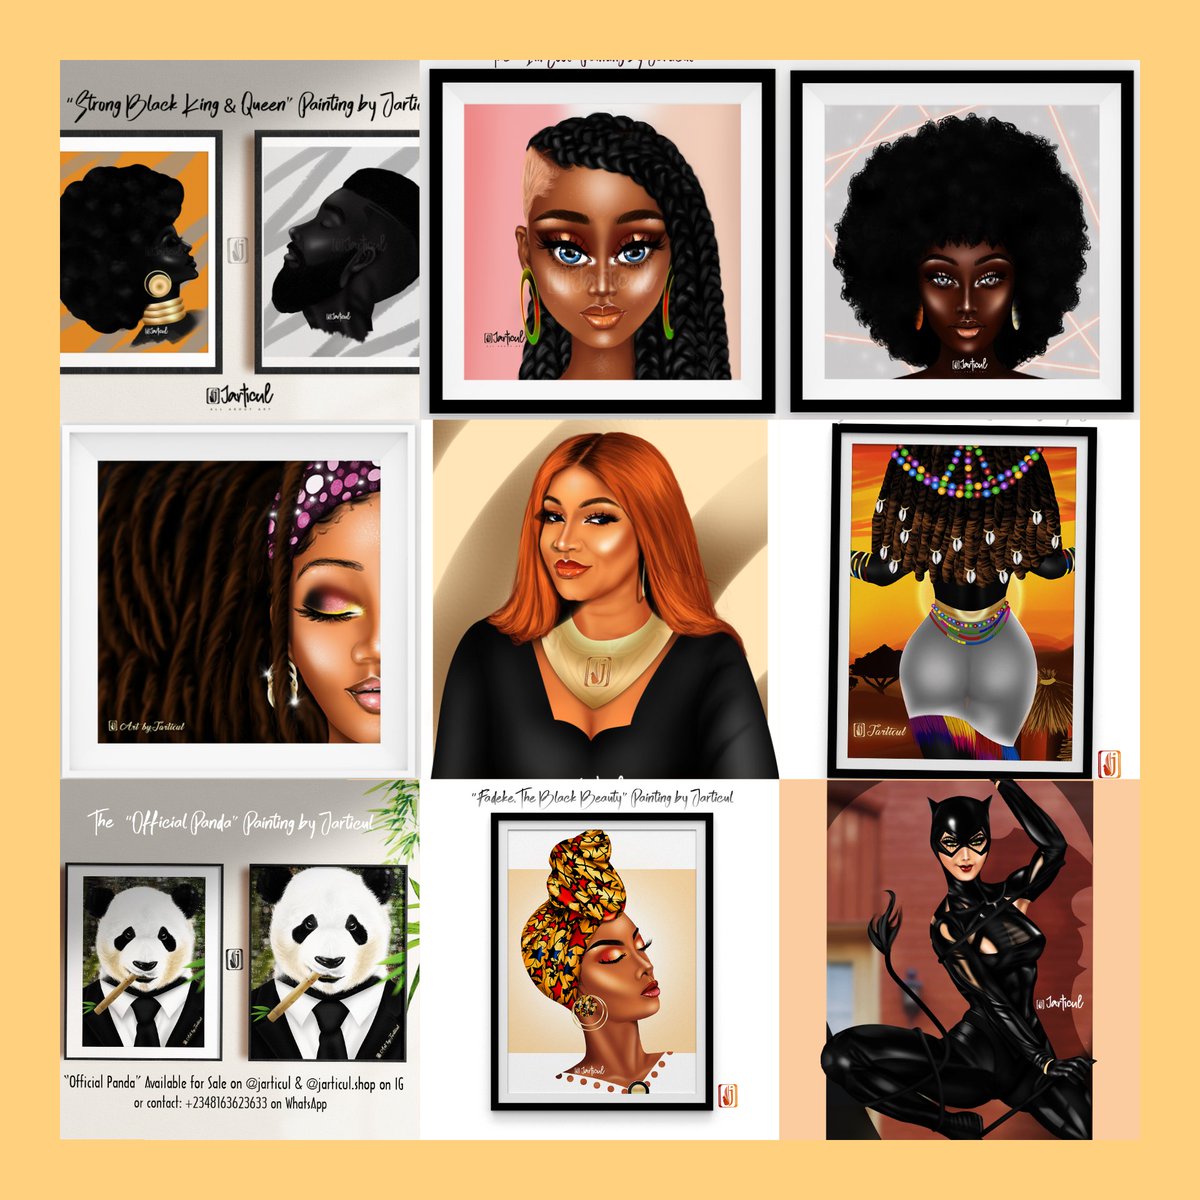 Sales Time!😍🎨🖼️🖌️
Pick your favorite and place your order! 
Swipe to see The Official Panda Painting, Shekere Princess Painting, Ejiro Painting,etc
We can deliver frames or prints to you
#artistsoninstagram #artcollector #ukartist #ukart #ukartists #ukartgallery #nigeriaartists